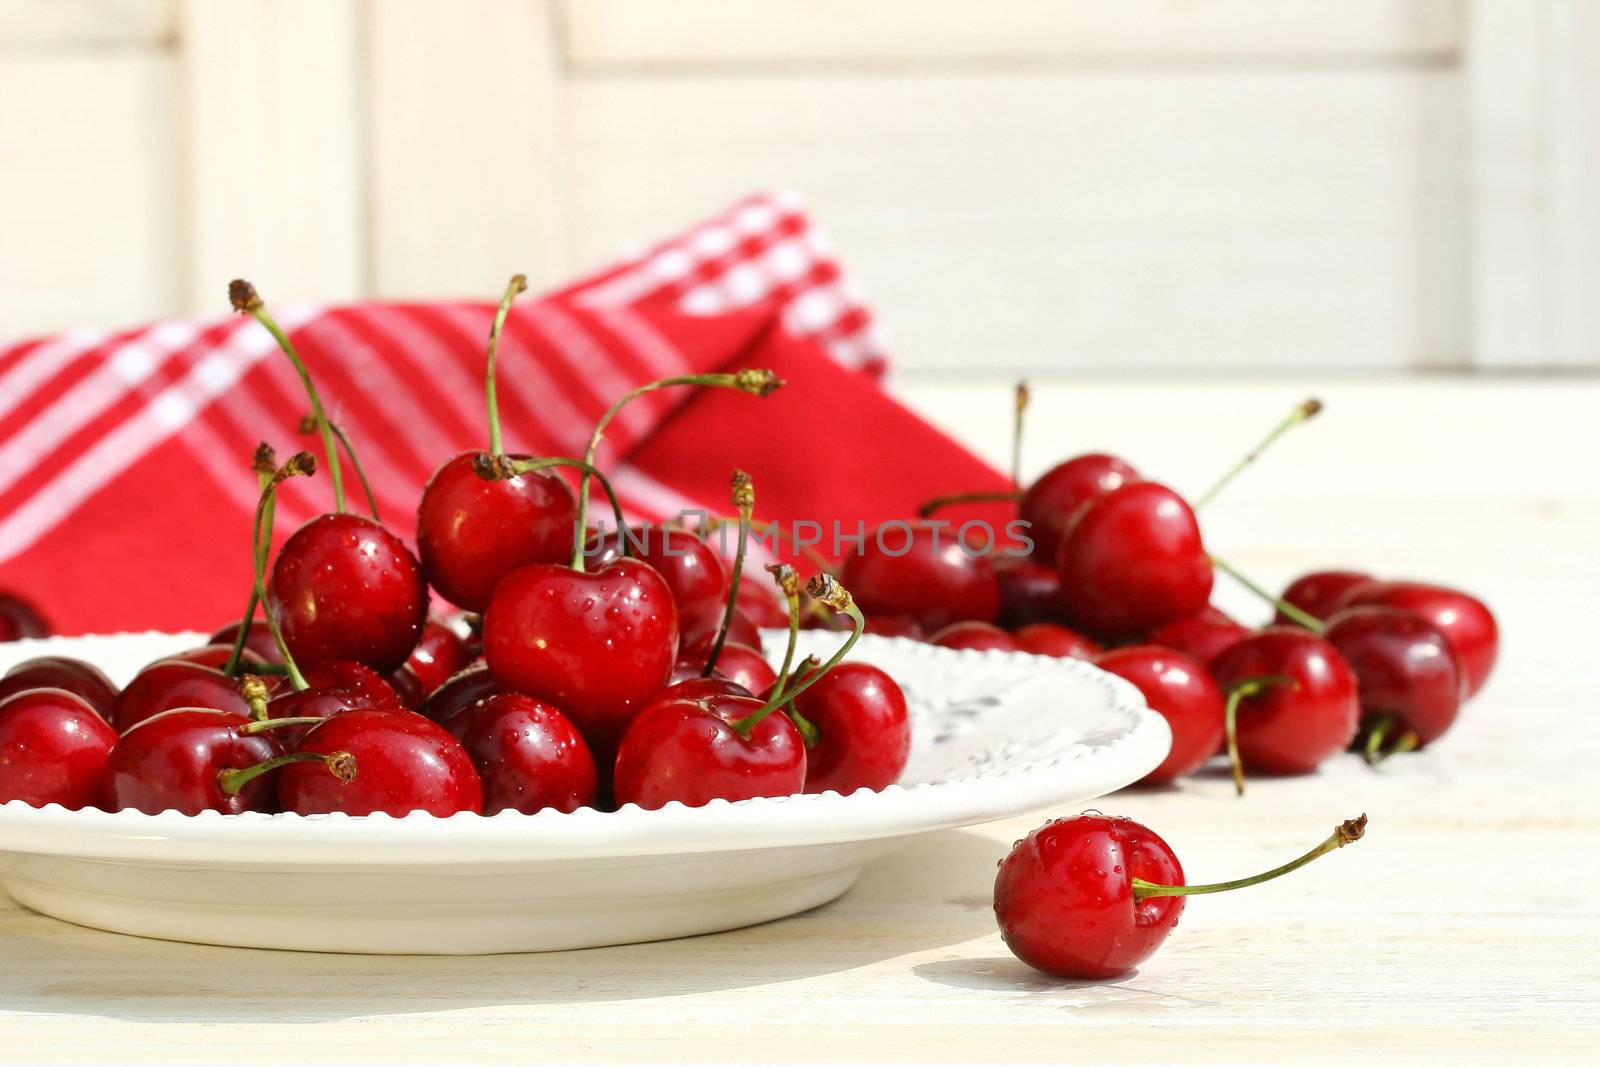 Red cherries on a plate by Sandralise